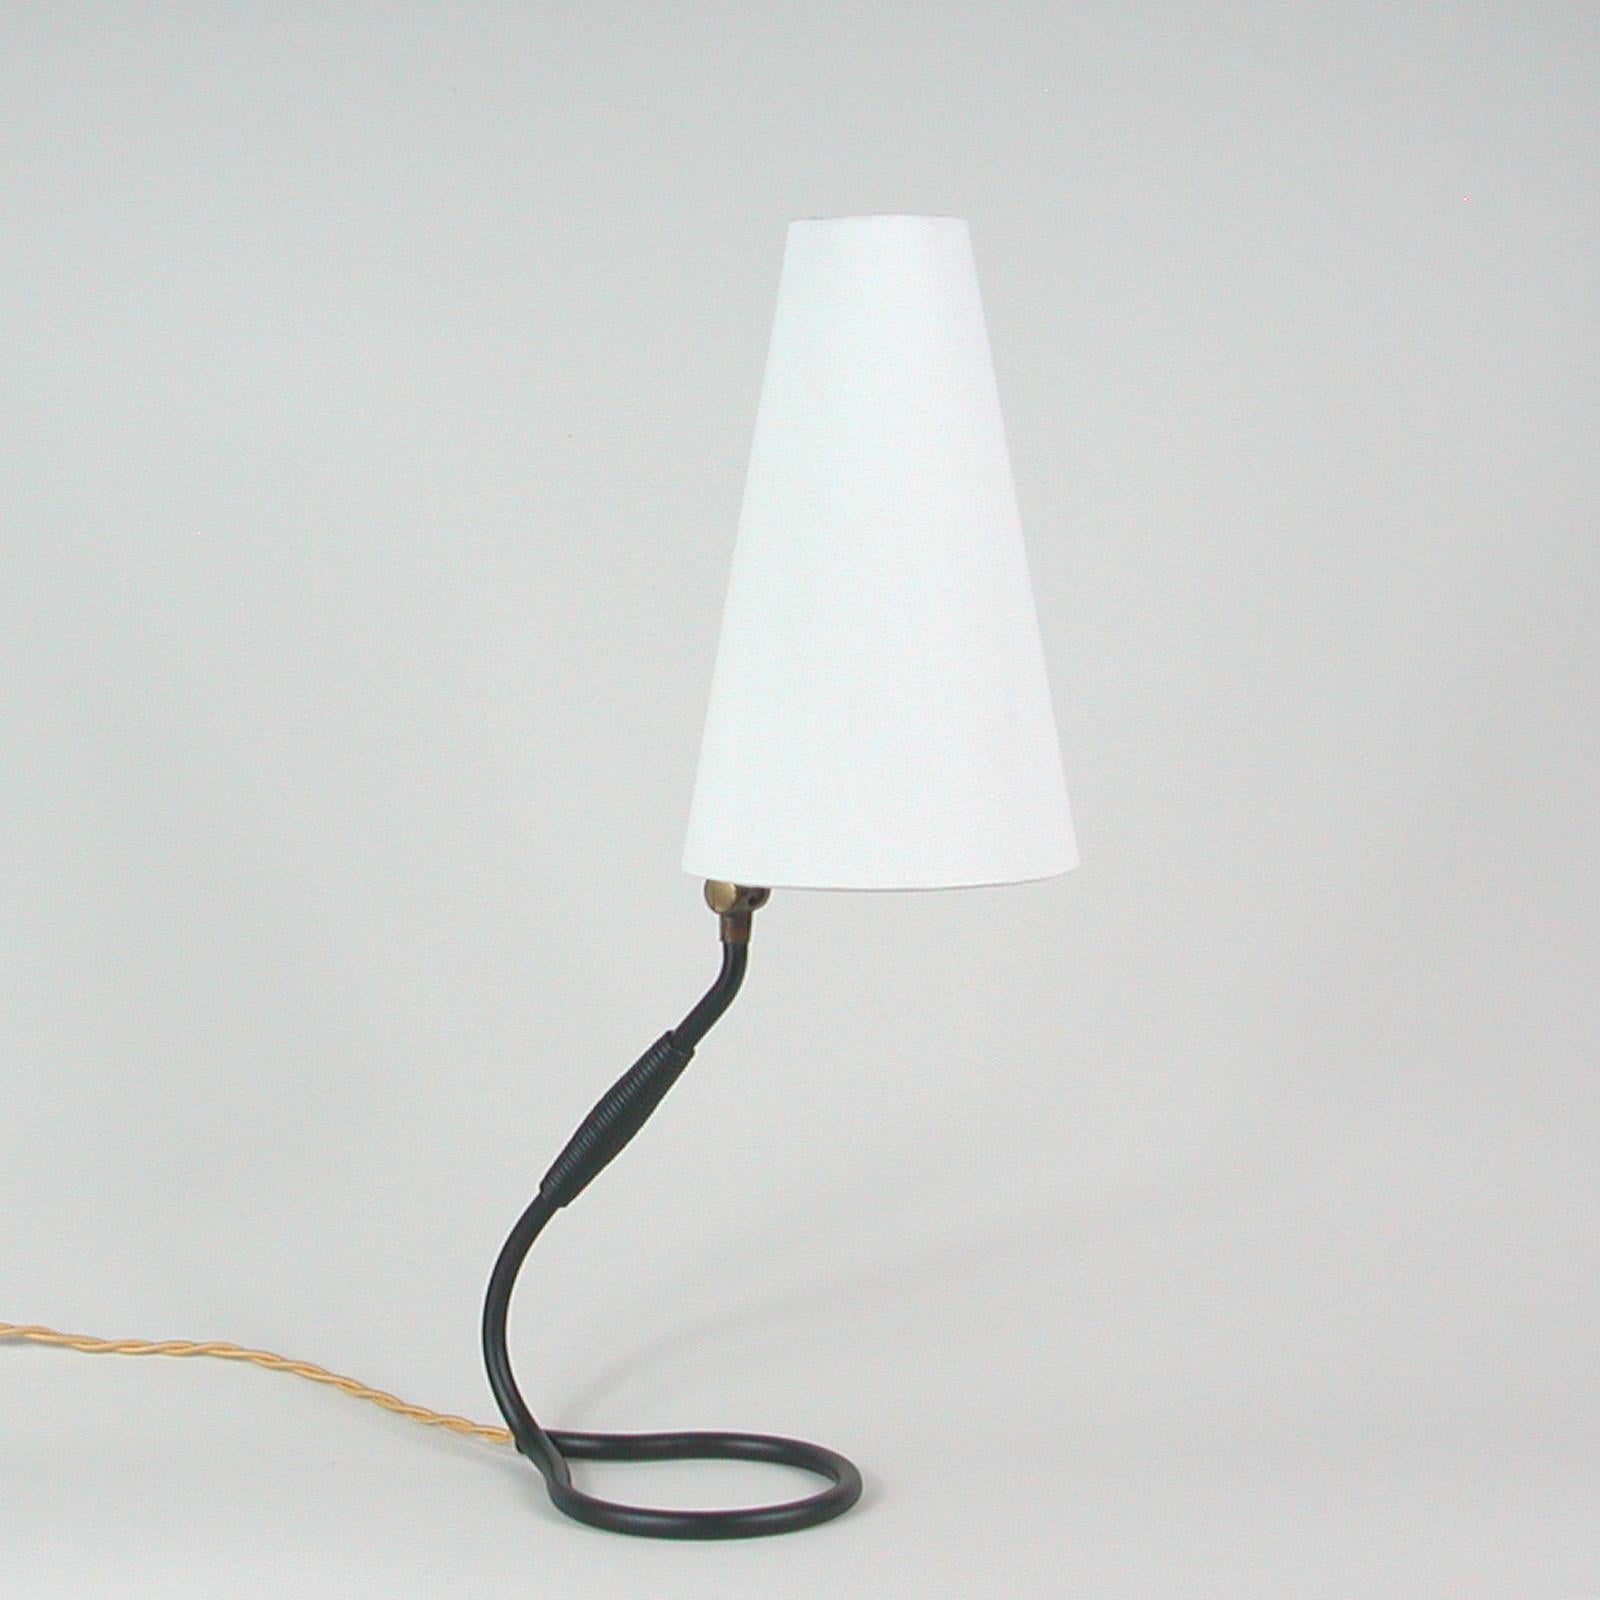 Adjustable Black Brass and Bakelite Wall or Table Lamp 306 by Kaare Klint, 1950s For Sale 7